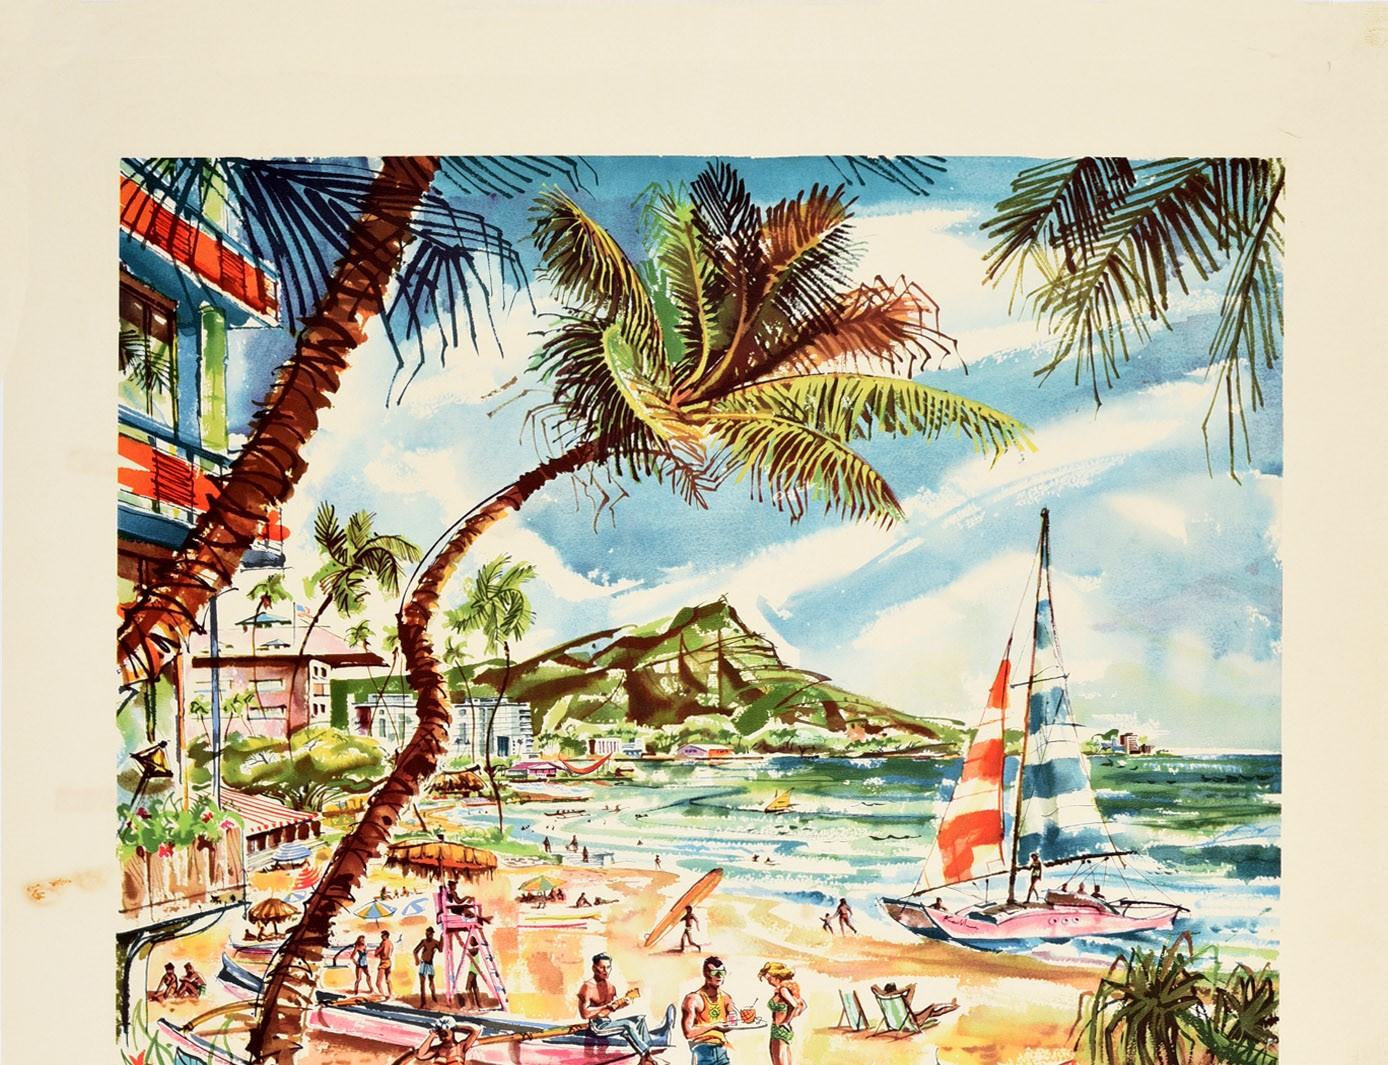 Original vintage travel poster for Hawaii Fly there by Qantas Australia's Round The World Airline featuring colourful artwork by Harry Rogers (1929-2012) showing holiday makers on the sandy Waikiki Beach relaxing and sunbathing with an outrigger